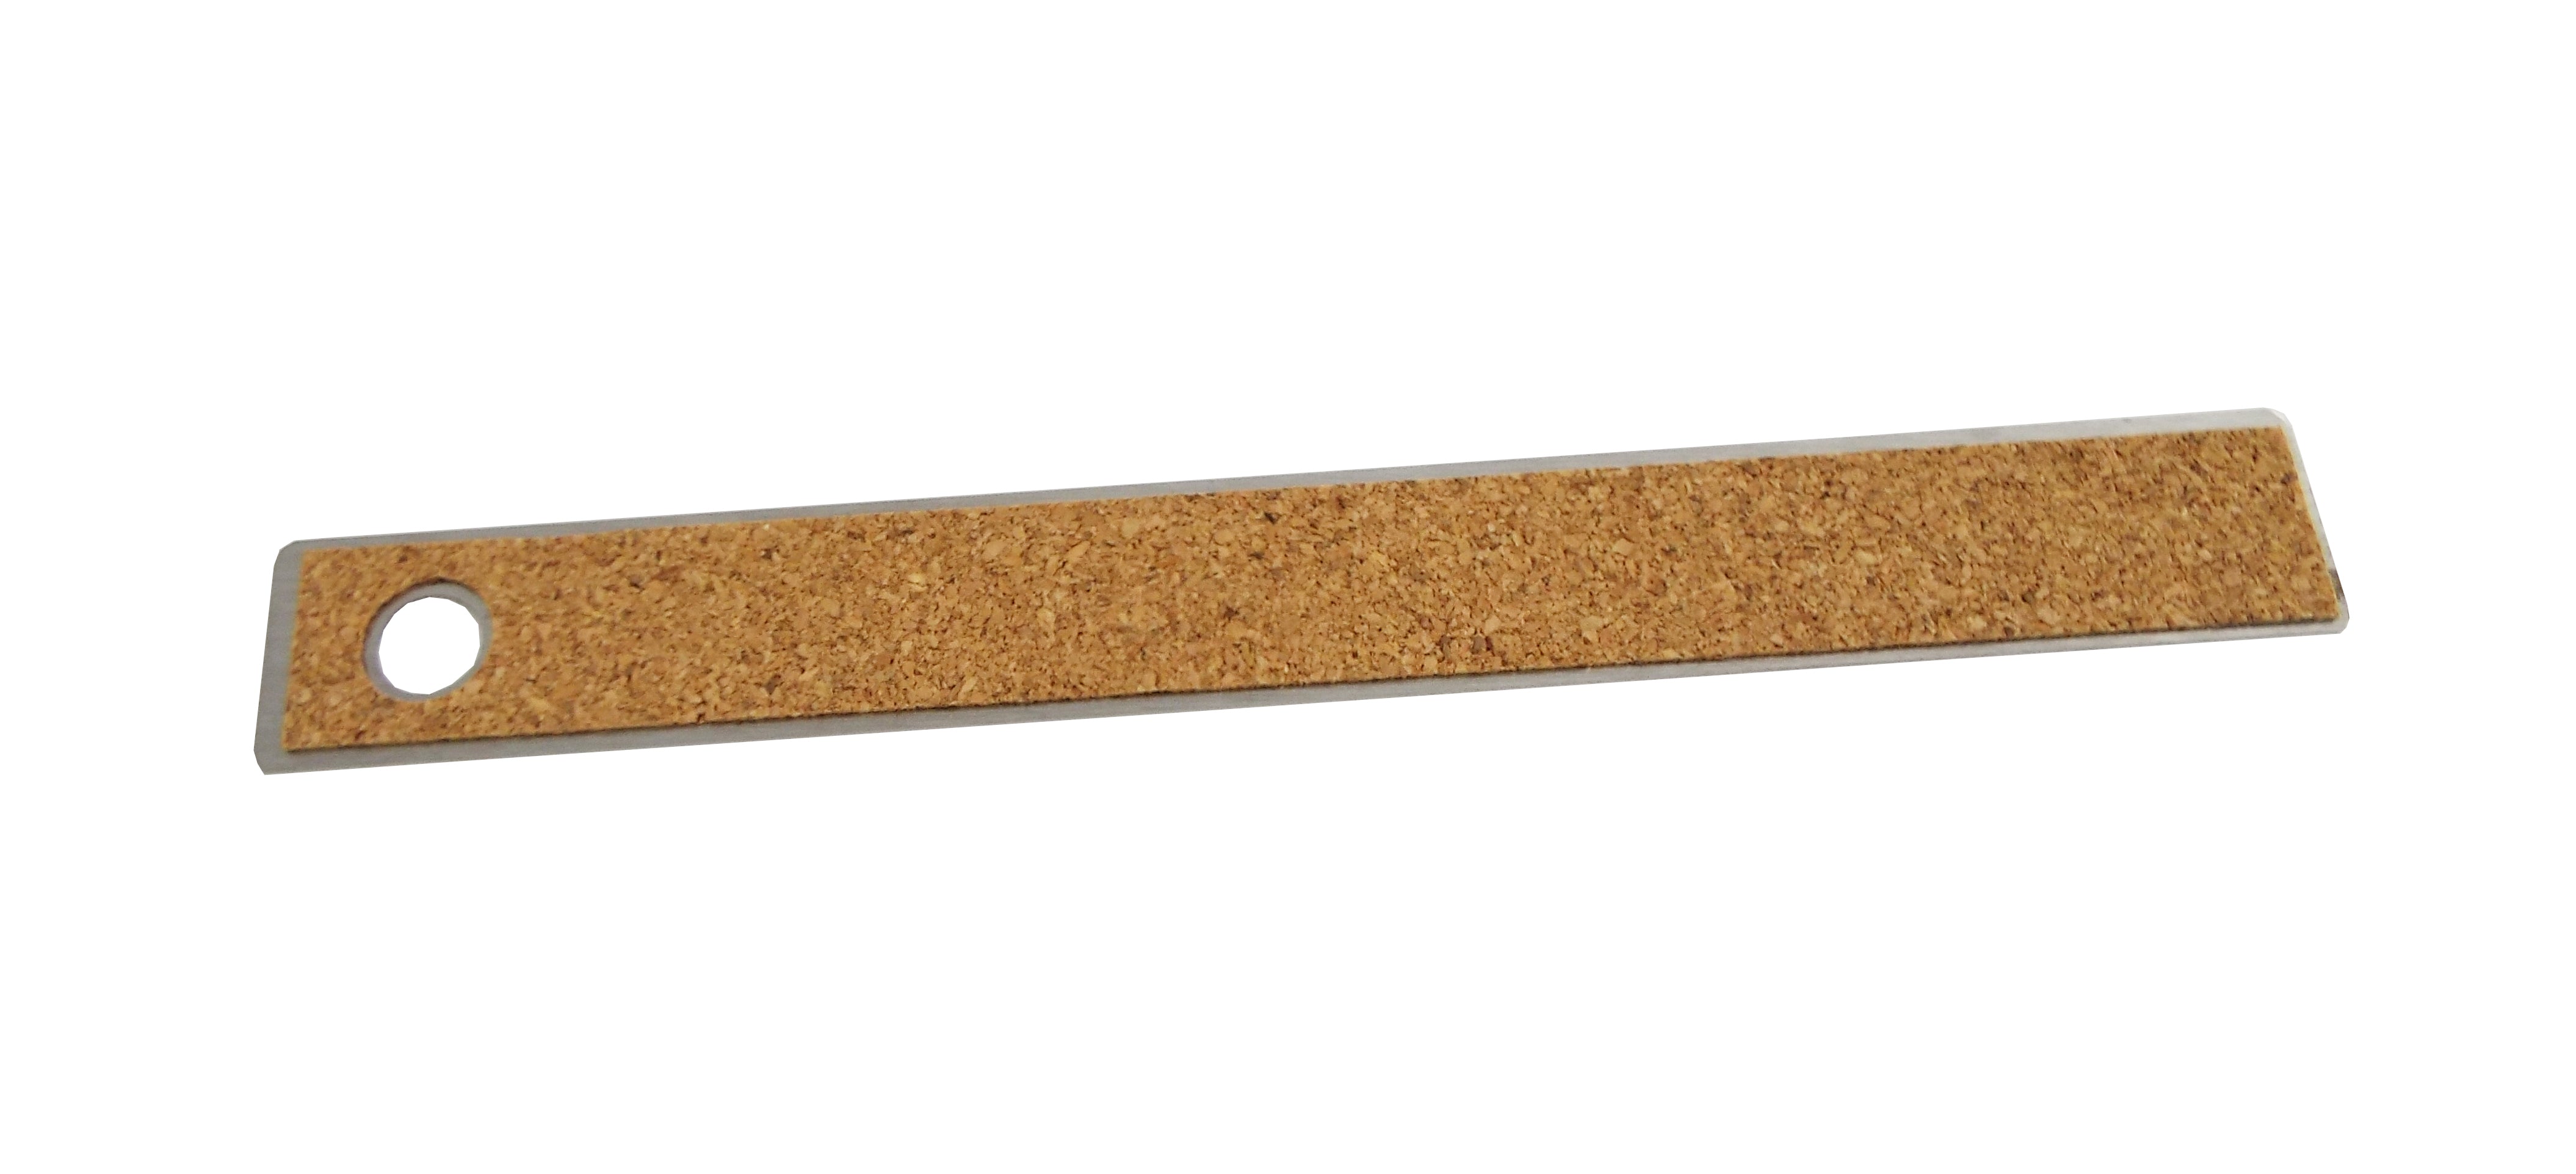 6 inch steel ruler from